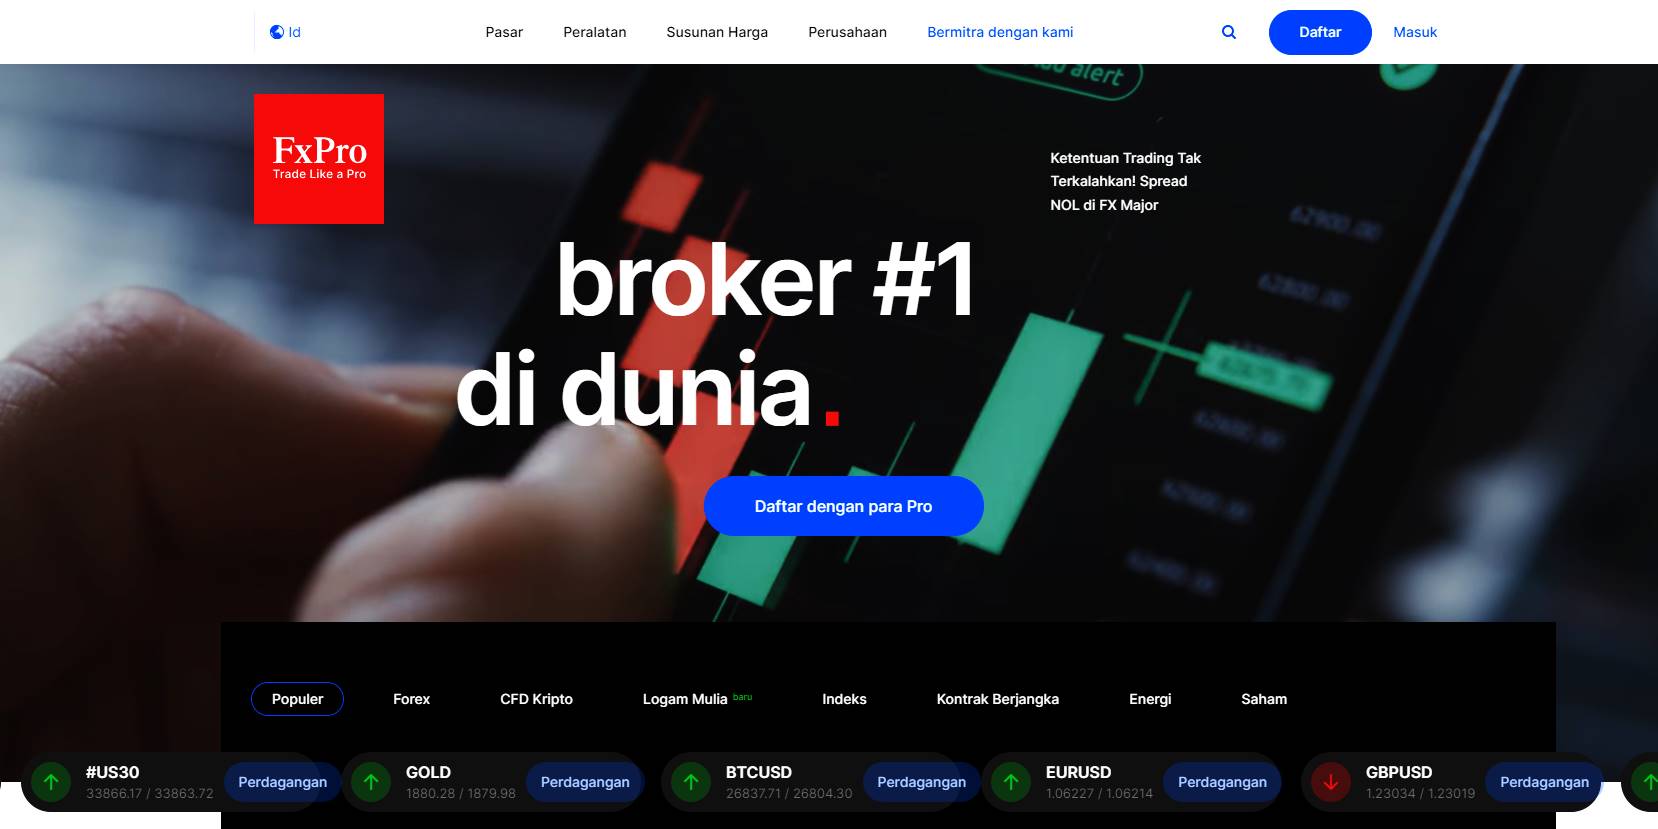 review FxPro broker